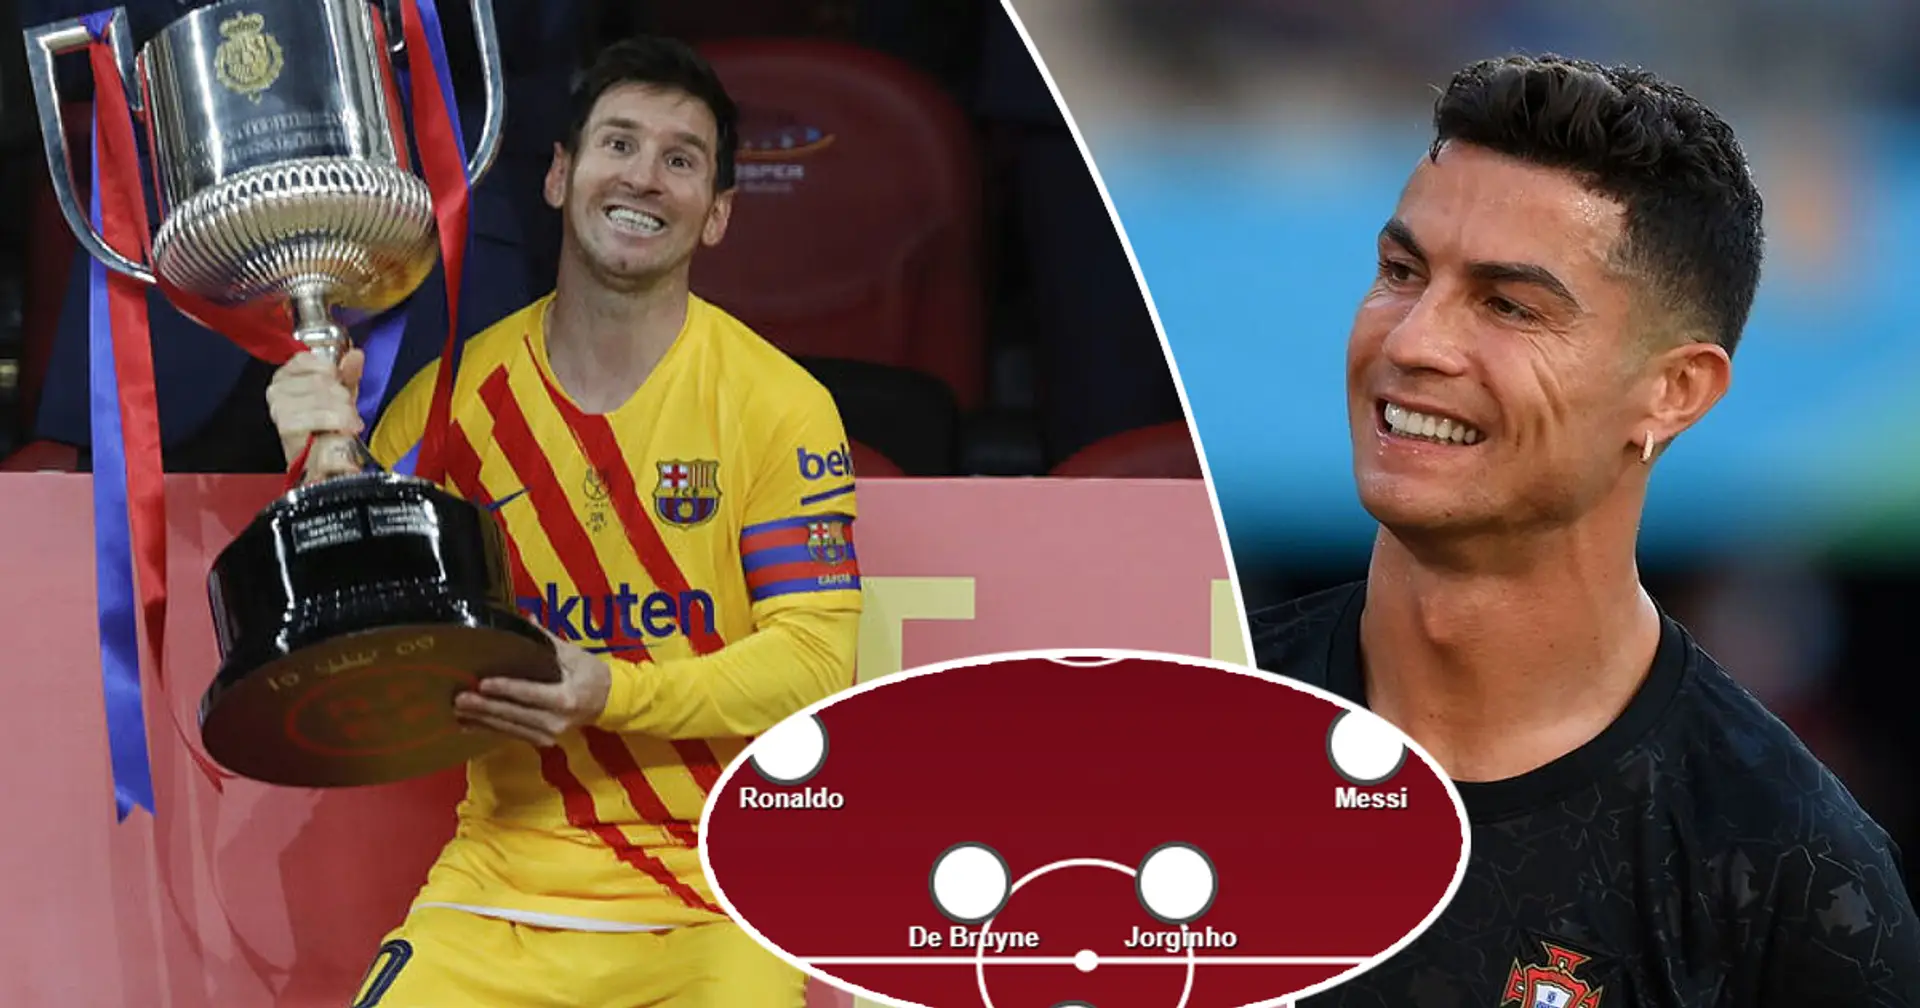 Messi–Ronaldo link-up & more: If 2021 Ballon d'Or contenders were a team